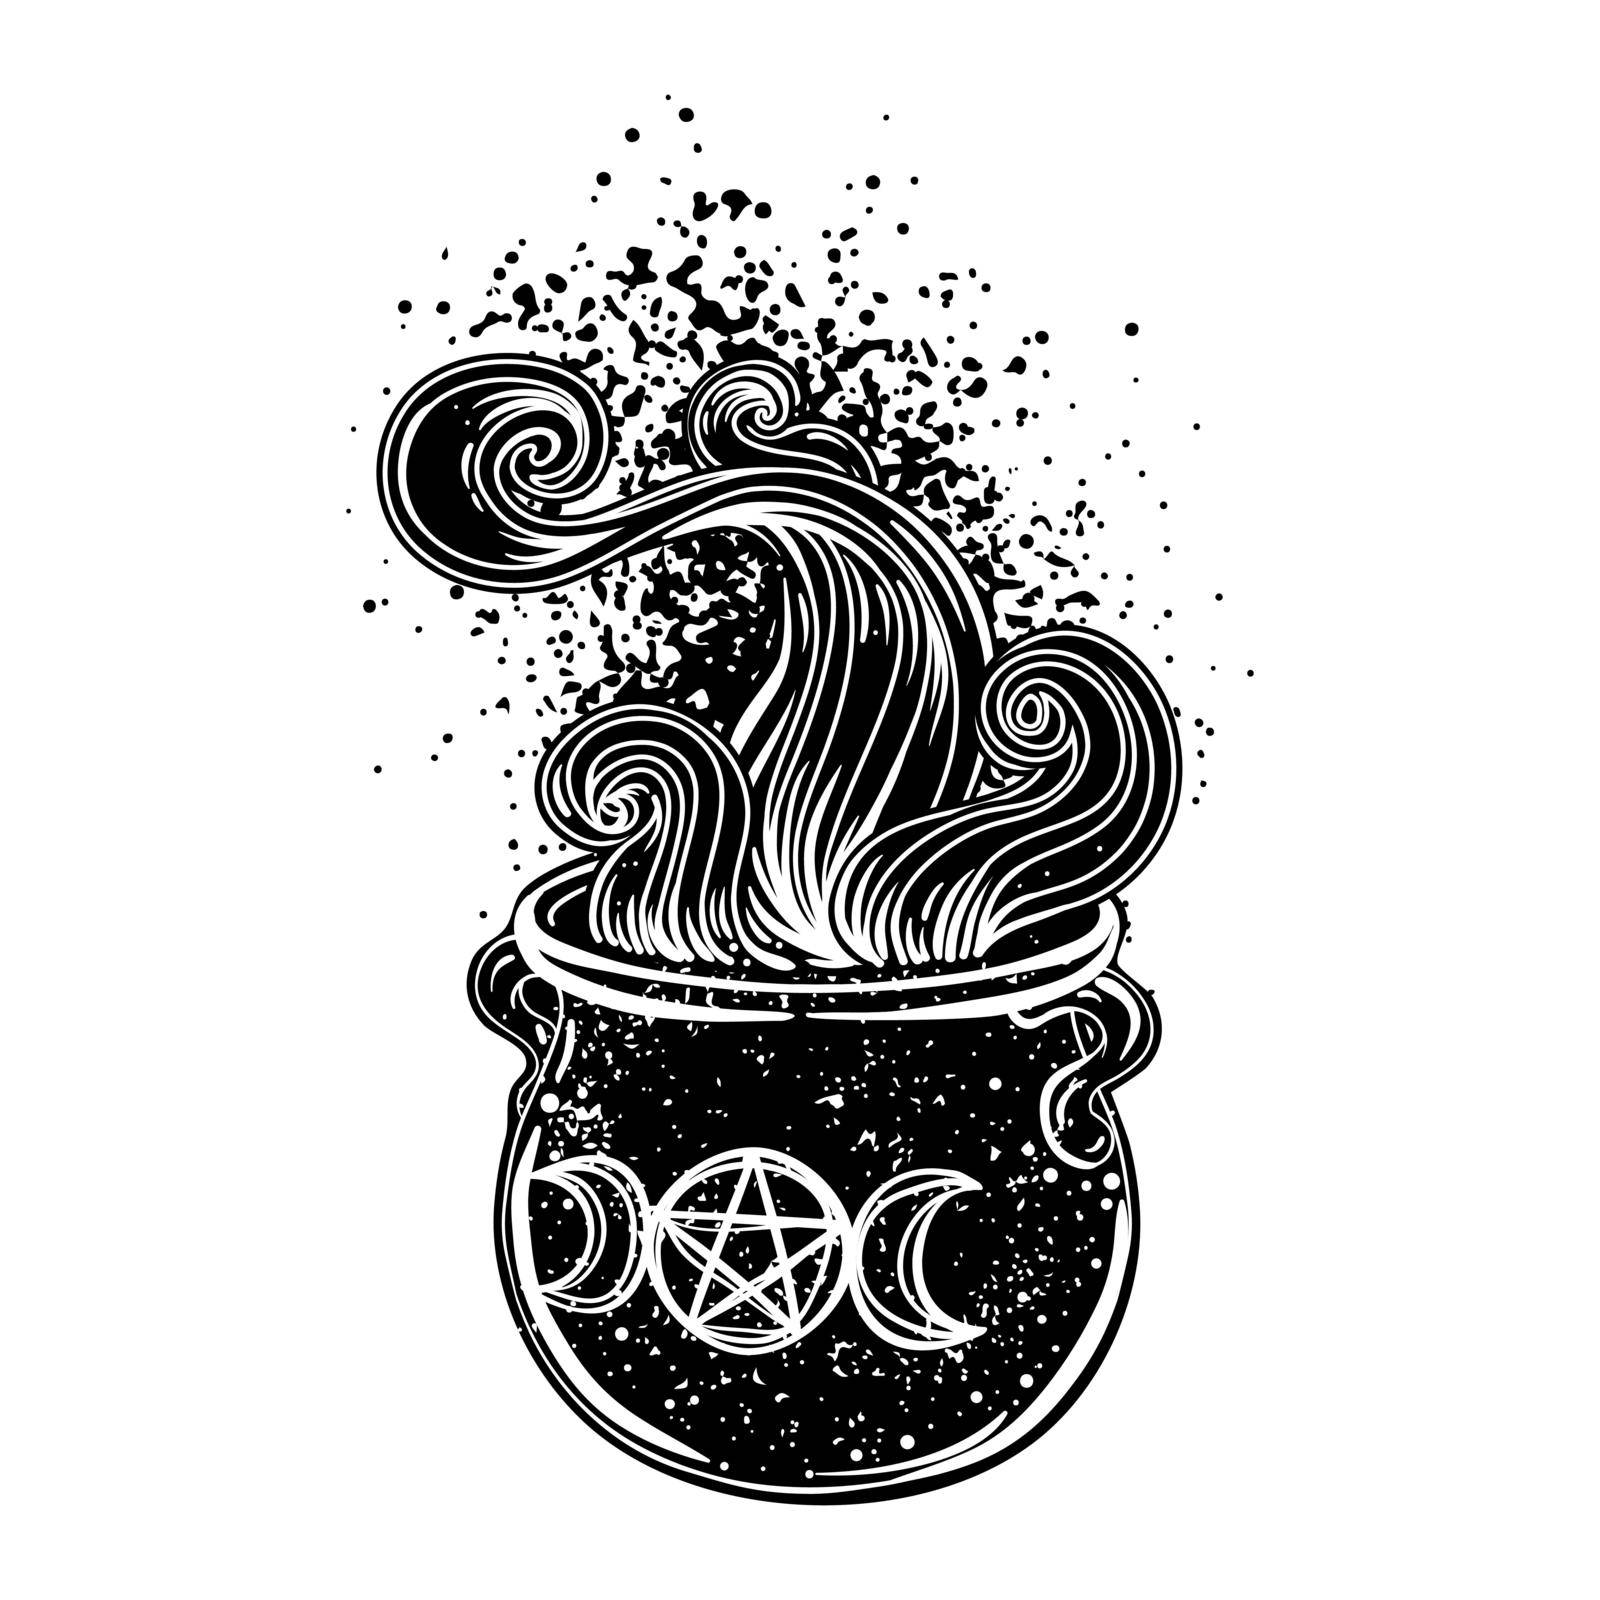 Witches cauldron. Vector isolated illustration in Victorian style. Mediumship divination equipment. flash tattoo drawing. Alchemy, religion, spirituality, occultism.